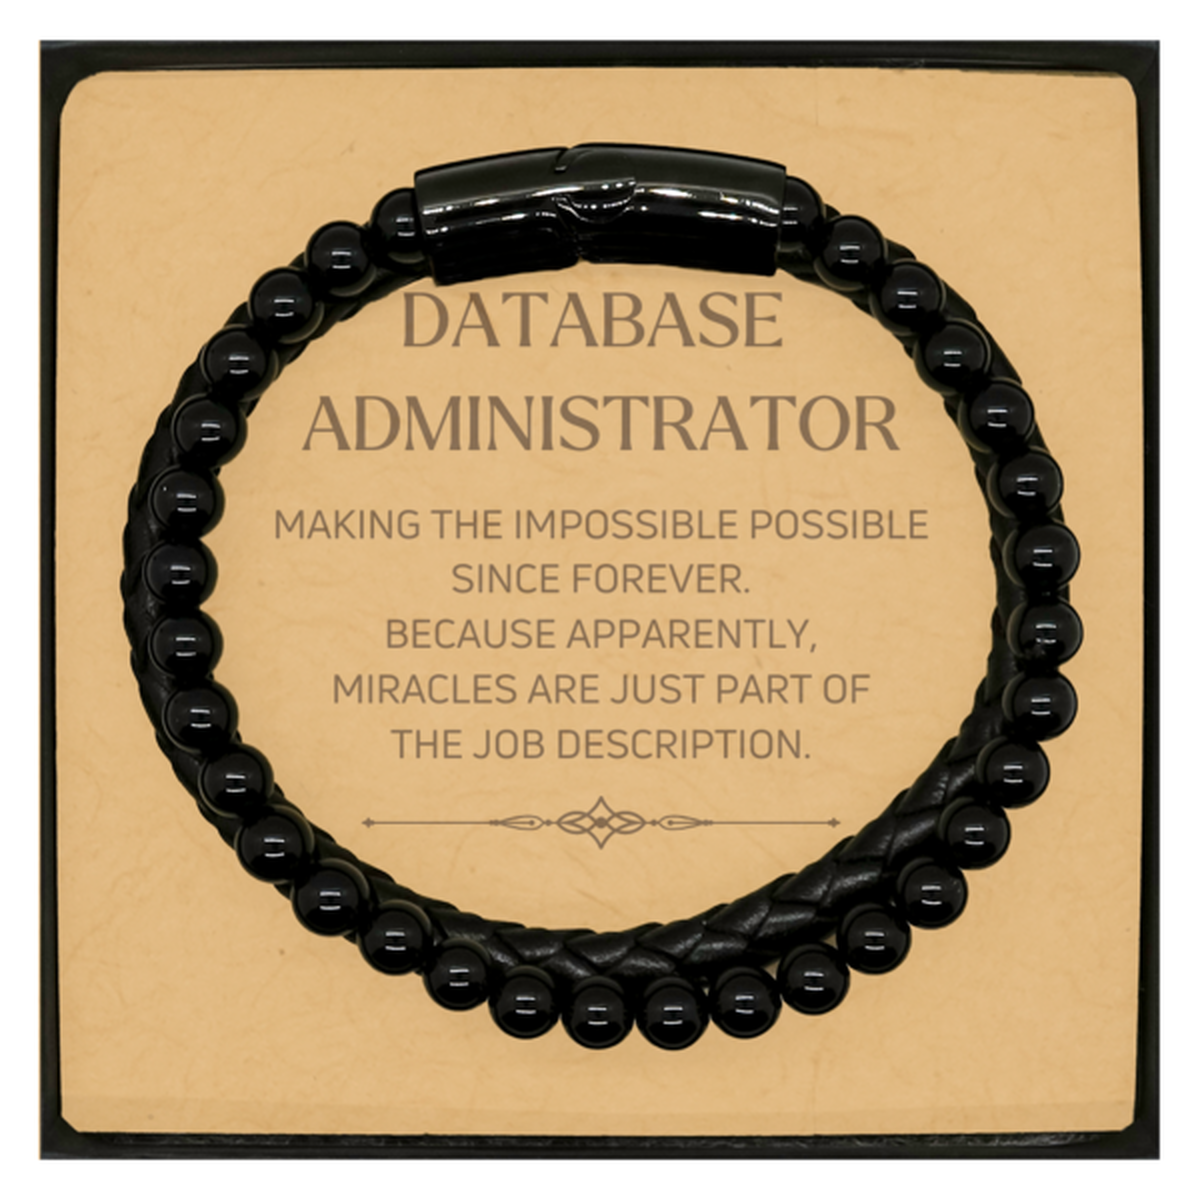 Funny Database Administrator Gifts, Miracles are just part of the job description, Inspirational Birthday Christmas Stone Leather Bracelets For Database Administrator, Men, Women, Coworkers, Friends, Boss